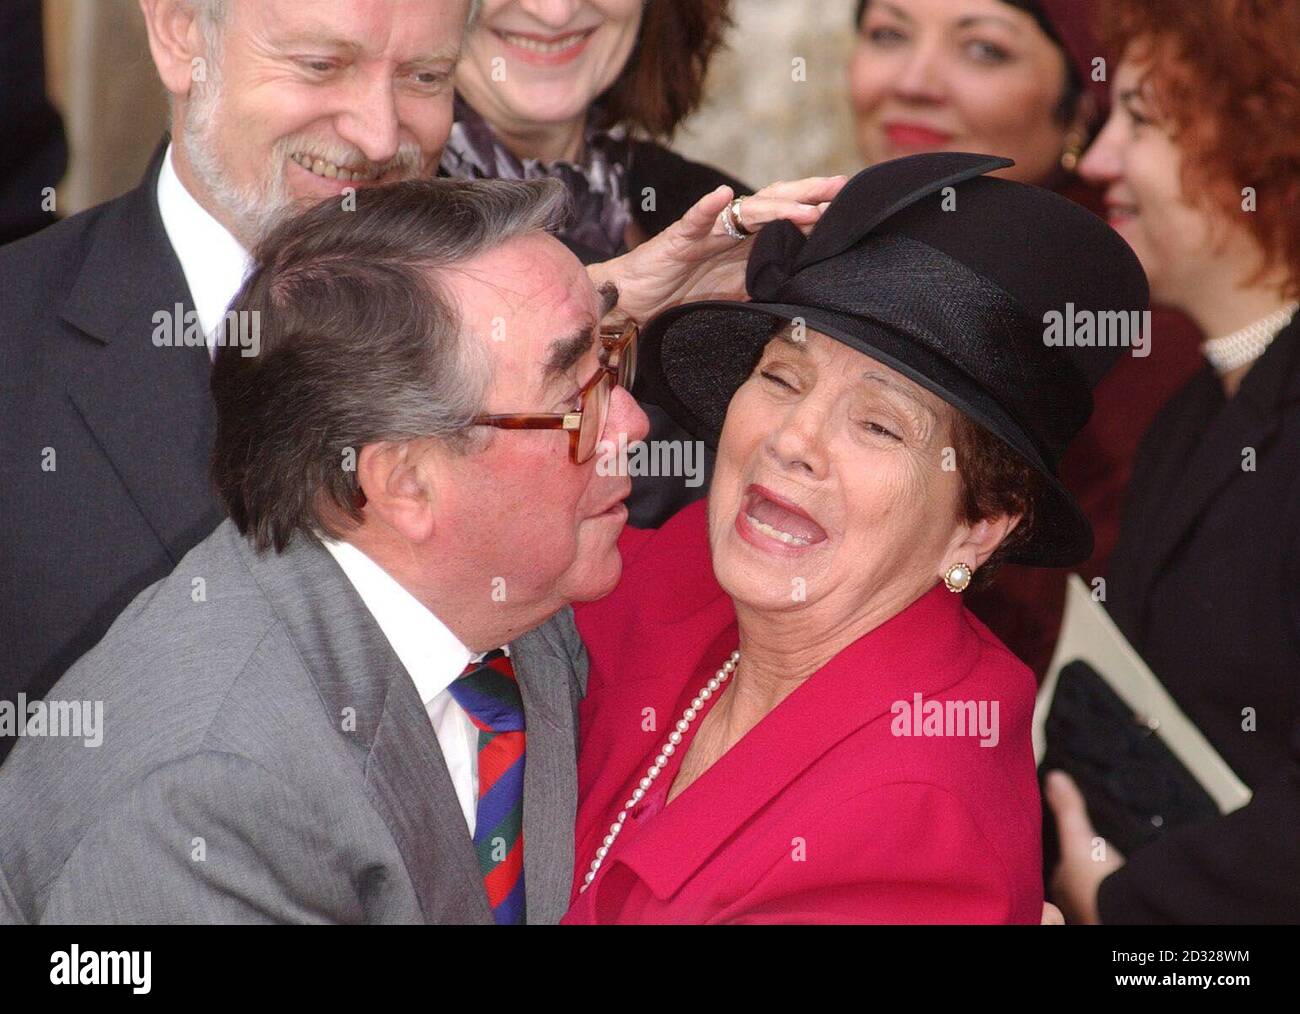 Comedian Ronnie Corbett greets Lady Myra Secombe, widow of comic genius Sir Harry Secombe, after a service of thanksgiving for Sir Harry at Westminster Abbey, London. * The Goon Show legend, who died in April from cancer at the age of 79, was remembered by family and friends at the event. The Prince of Wales was among The Goons' most prominent fans and led the tributes following his death. Sir Harry was also known for his fine tenor singing voice which he used to great effect on the religious TV programmes he presented, such as Highway and Songs Of Praise. He had battled against ill-health Stock Photo